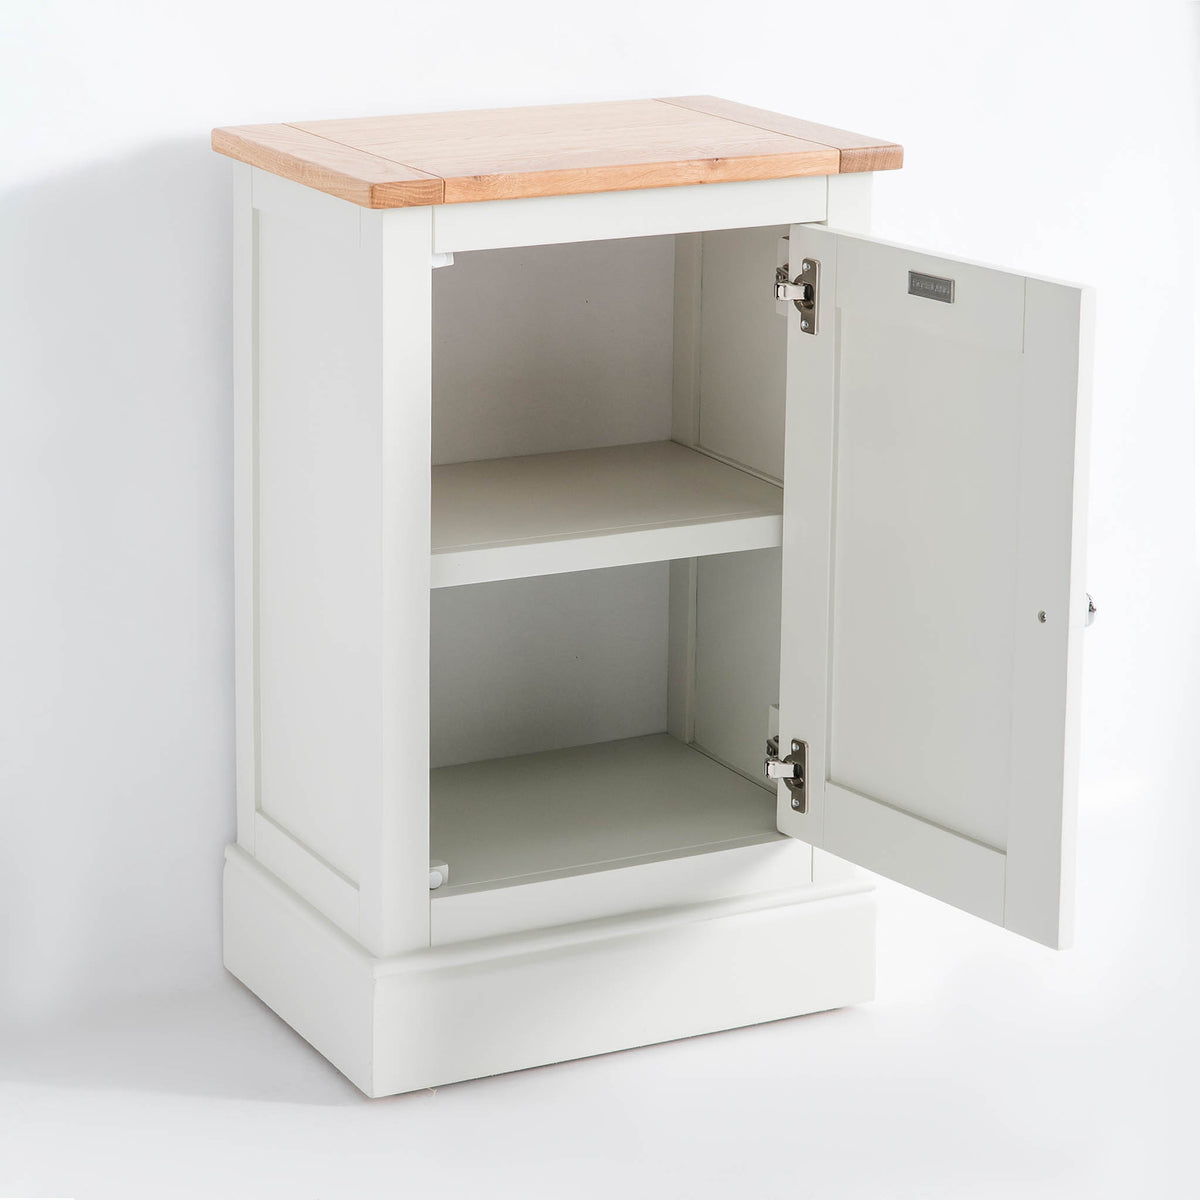 Opened door side view of the Chichester Ivory Cream Mini Cupboard